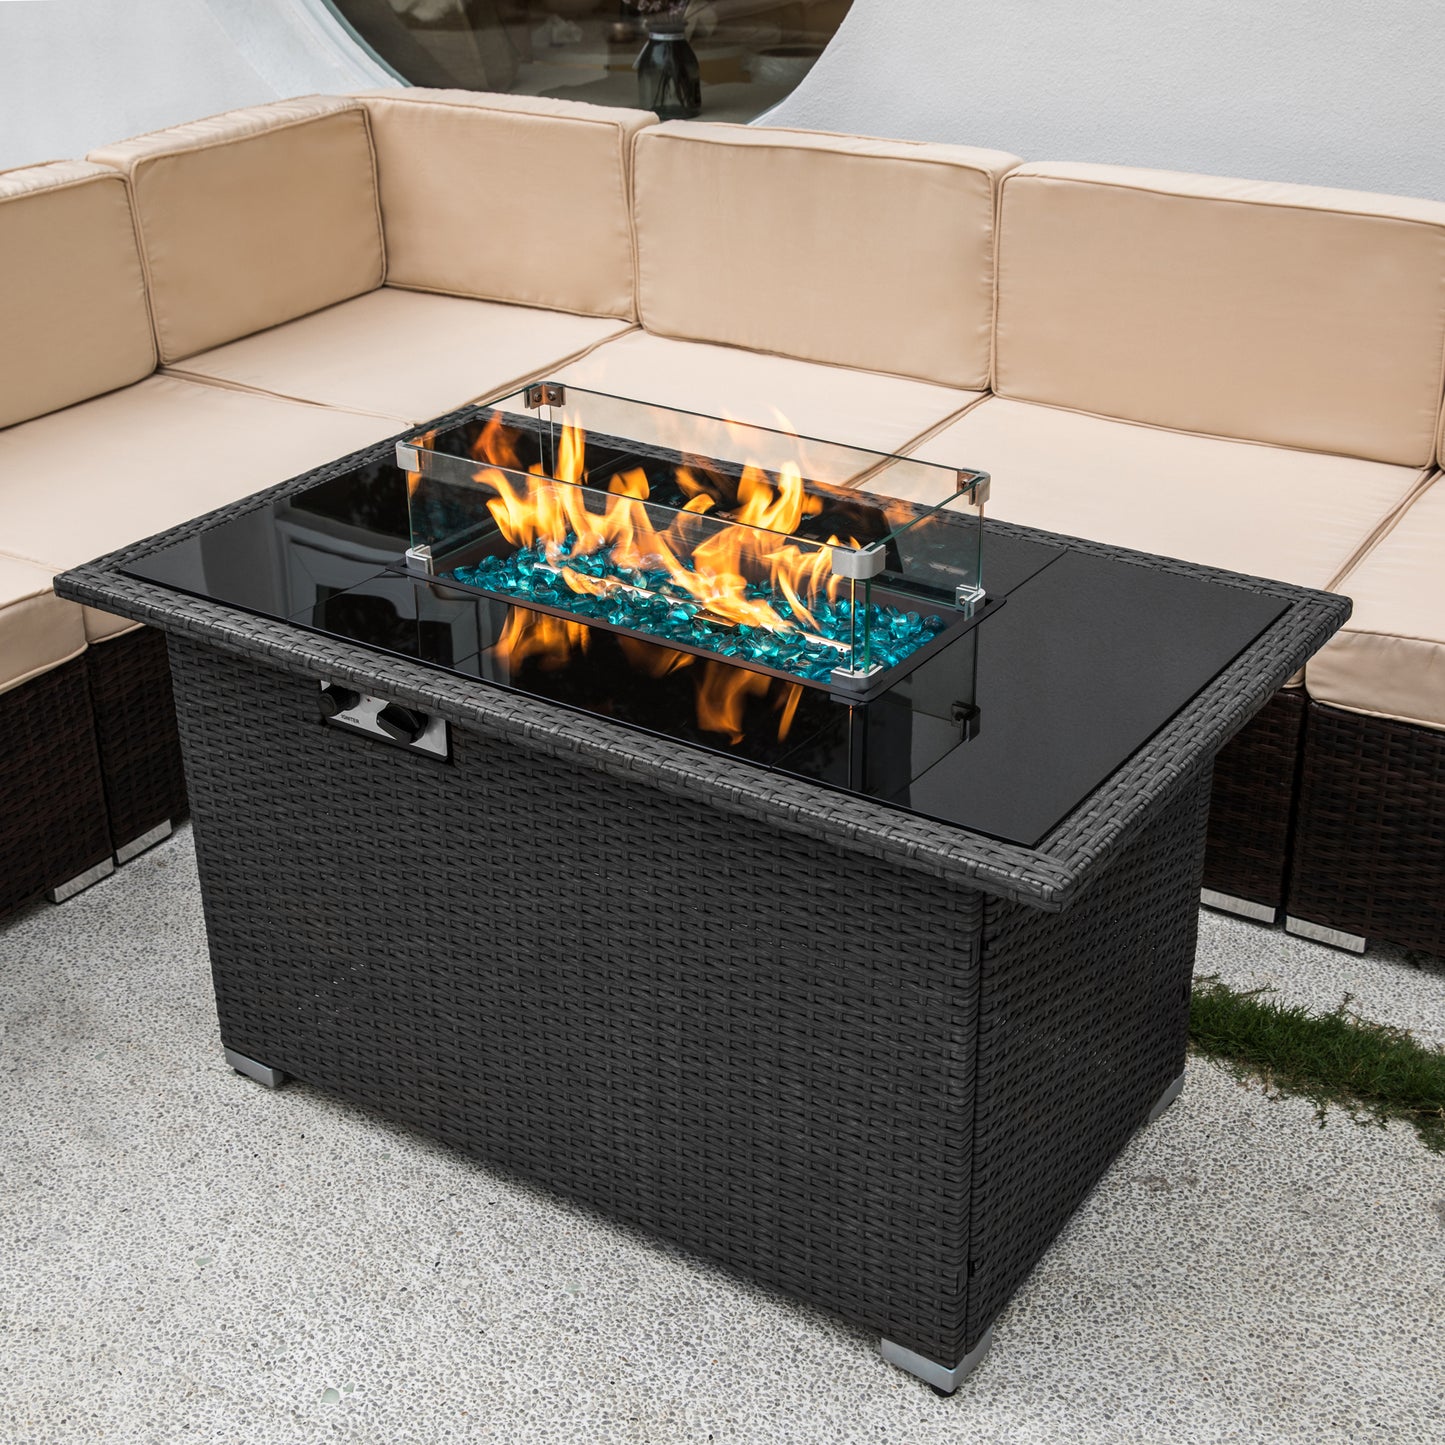 Outdoor Fire Pit, SYNGAR 44" 50,000 BTU Auto-Ignition Propane Fire Pit Table W/ Glass Wind Guard, Tempered Glass Tabletop, Lid, Rocks & Cover, 2-in-1 Gas Fire Pit for Patio Yard Poolside, C05